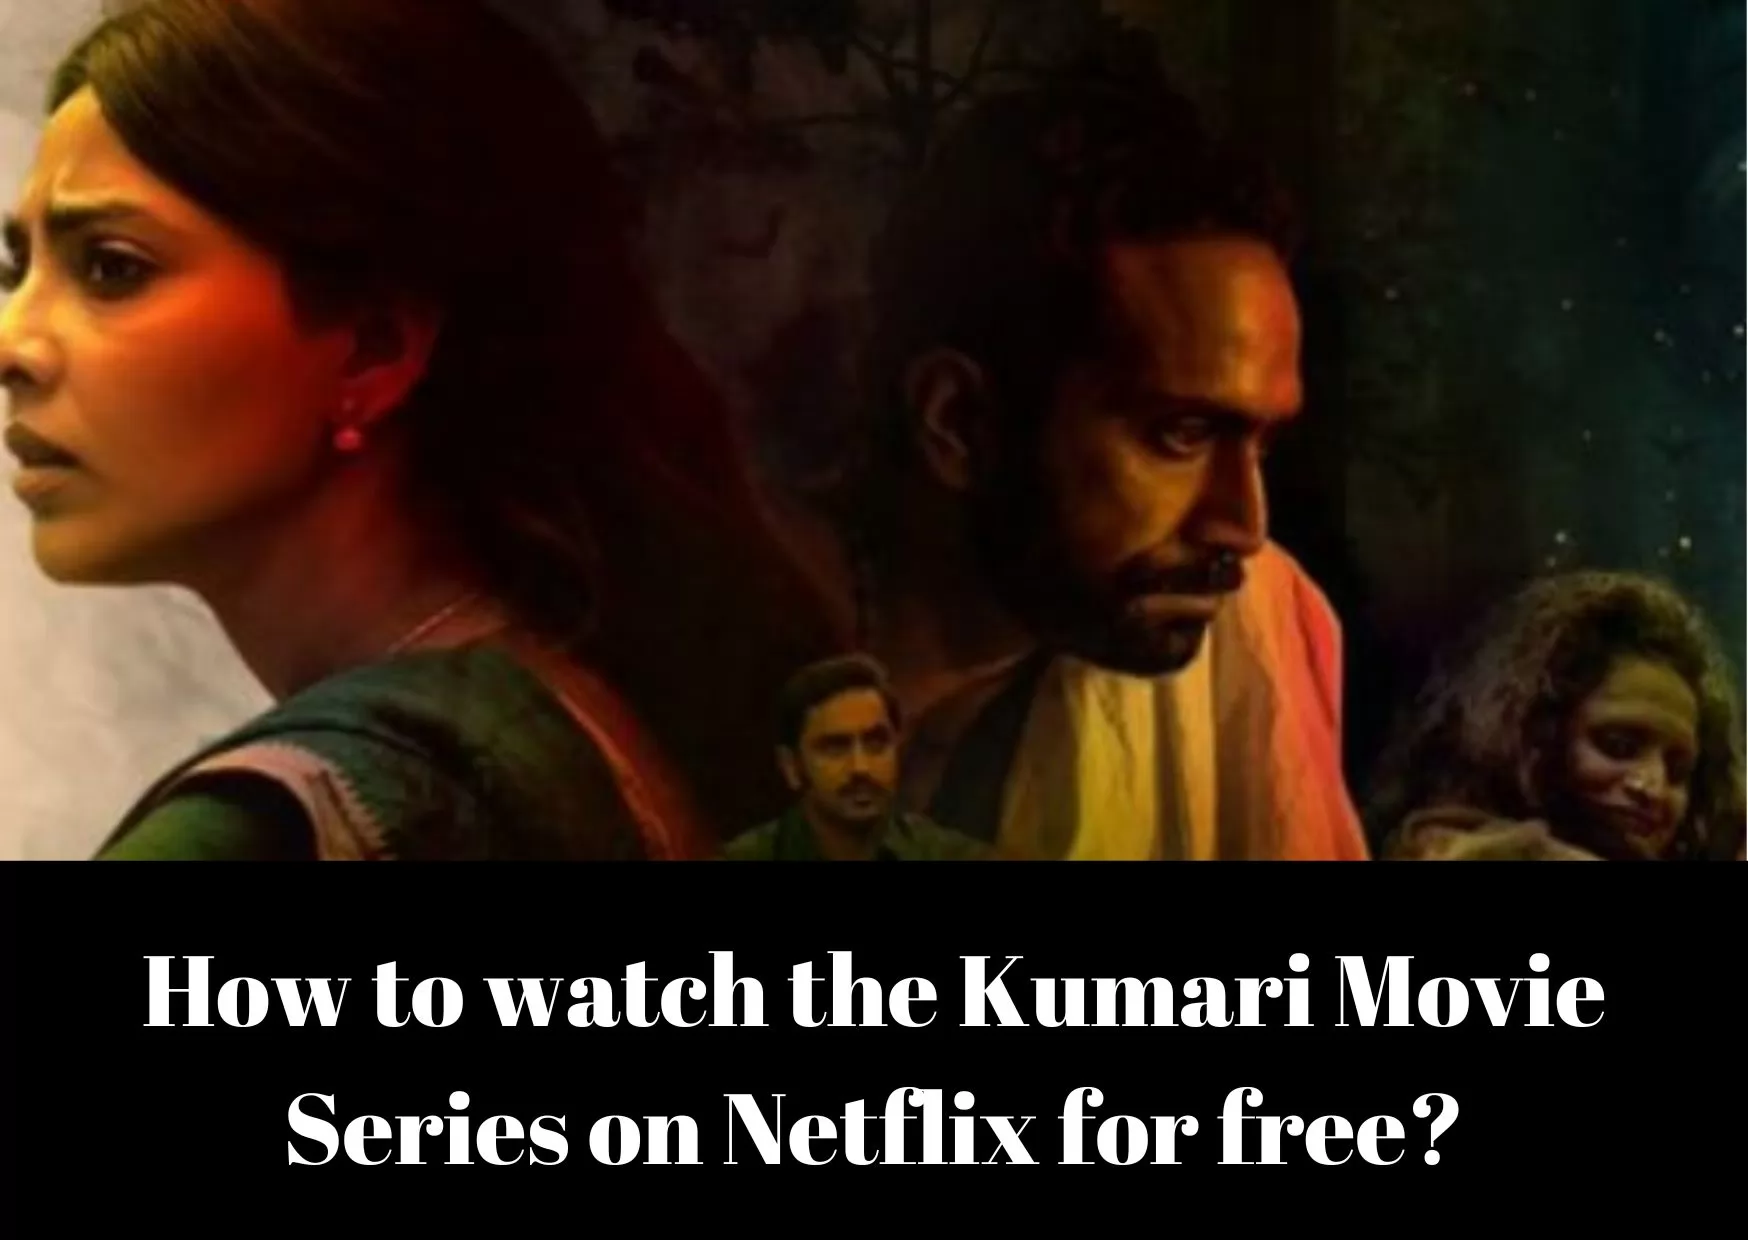 How to watch the Kumari Movie Series on Netflix for free